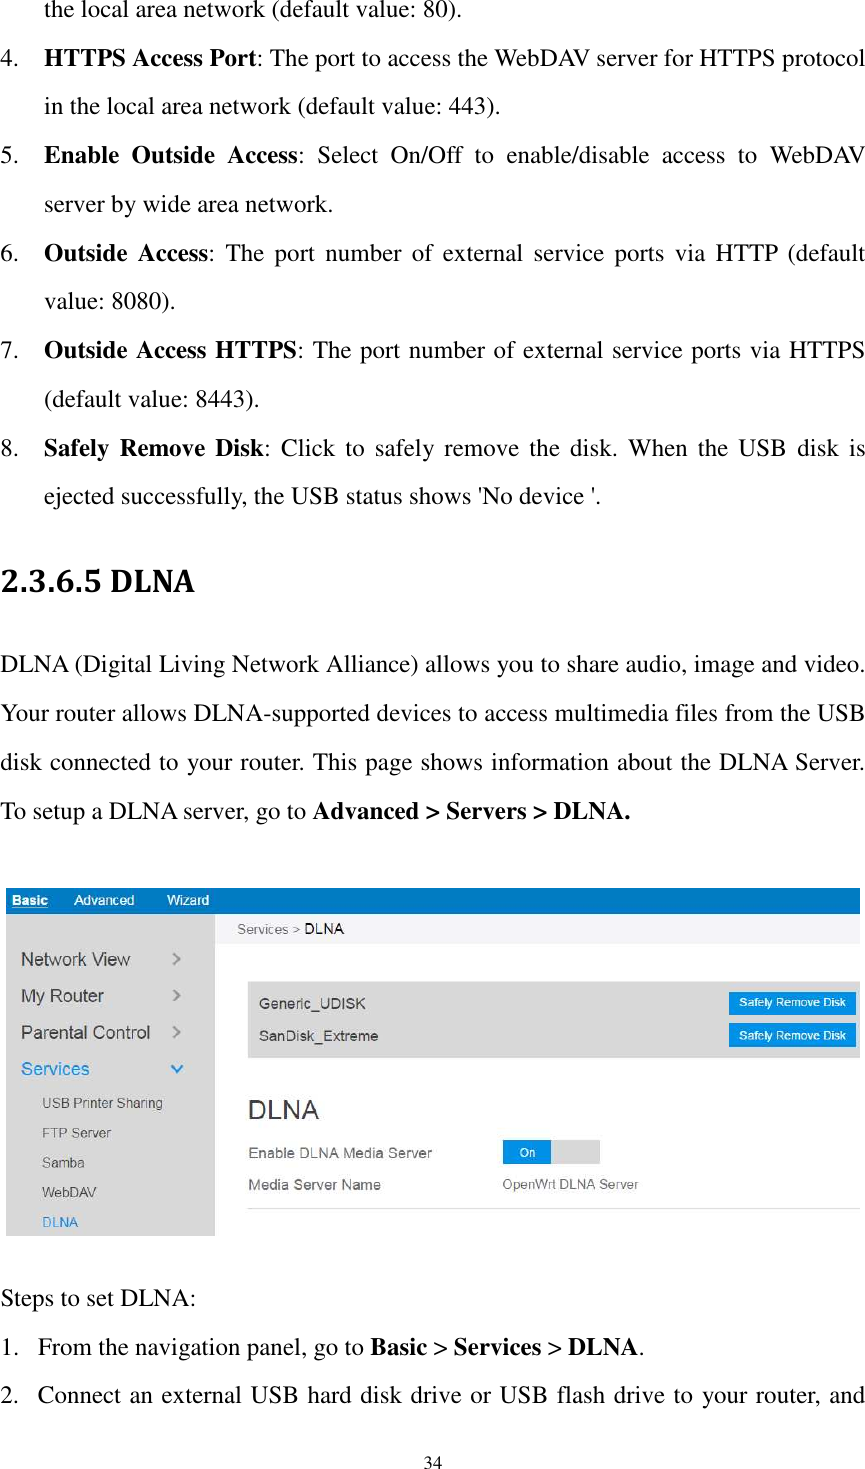  34 the local area network (default value: 80). 4. HTTPS Access Port: The port to access the WebDAV server for HTTPS protocol in the local area network (default value: 443). 5. Enable  Outside  Access:  Select  On/Off  to  enable/disable  access  to  WebDAV server by wide area network. 6. Outside  Access:  The  port  number  of  external  service  ports  via  HTTP  (default value: 8080). 7. Outside Access HTTPS: The port number of external service ports via HTTPS (default value: 8443). 8. Safely Remove Disk:  Click  to  safely remove  the disk.  When  the  USB  disk is ejected successfully, the USB status shows &apos;No device &apos;. 2.3.6.5 DLNA DLNA (Digital Living Network Alliance) allows you to share audio, image and video. Your router allows DLNA-supported devices to access multimedia files from the USB disk connected to your router. This page shows information about the DLNA Server. To setup a DLNA server, go to Advanced &gt; Servers &gt; DLNA.    Steps to set DLNA: 1. From the navigation panel, go to Basic &gt; Services &gt; DLNA. 2. Connect an external USB hard disk drive or USB flash drive to your router, and 